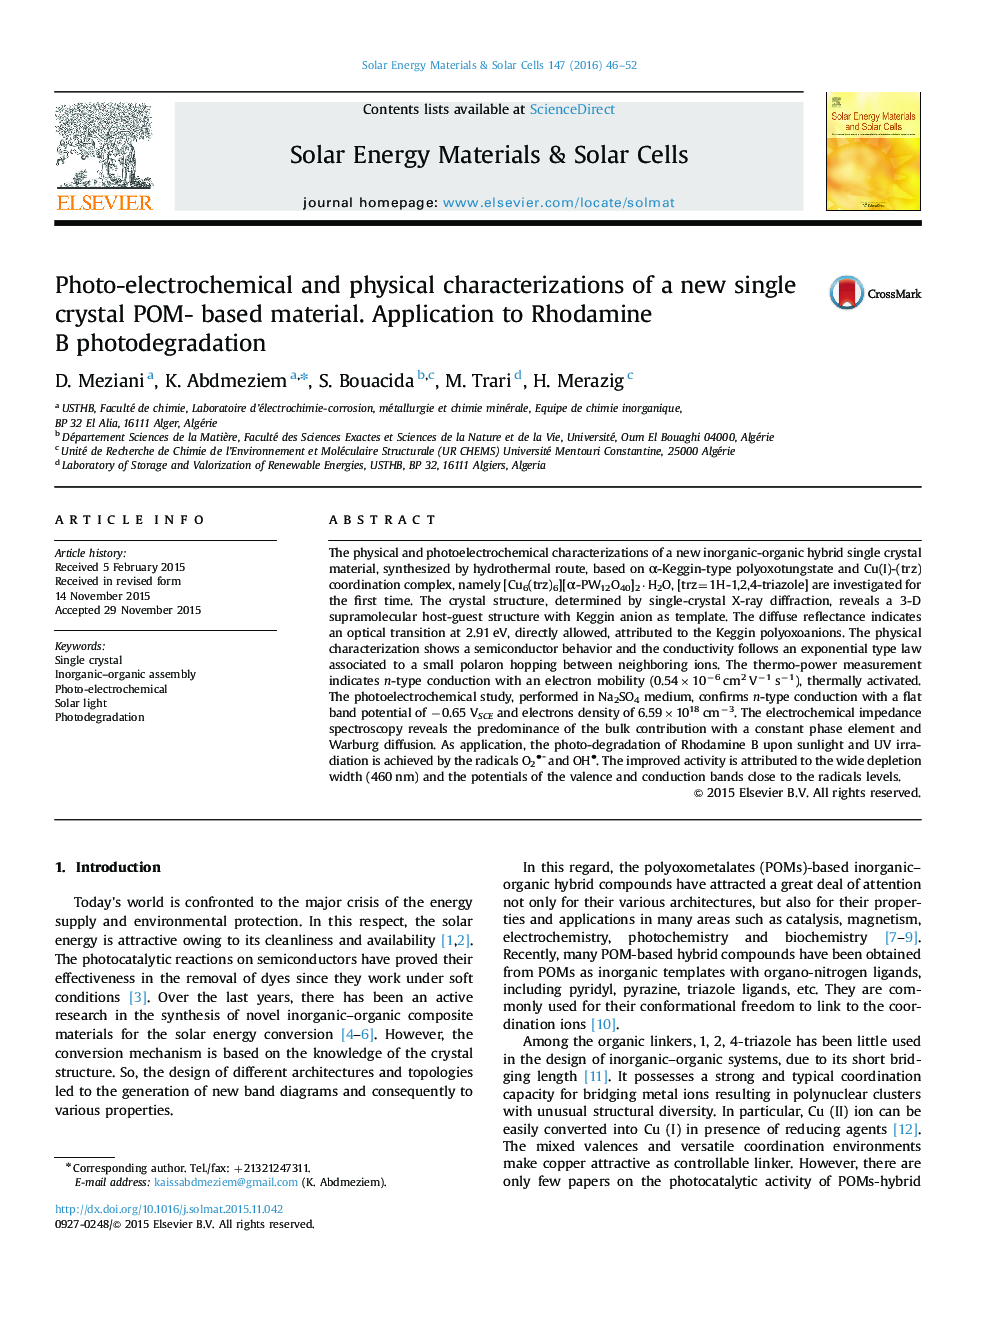 Photo-electrochemical and physical characterizations of a new single crystal POM- based material. Application to Rhodamine B photodegradation